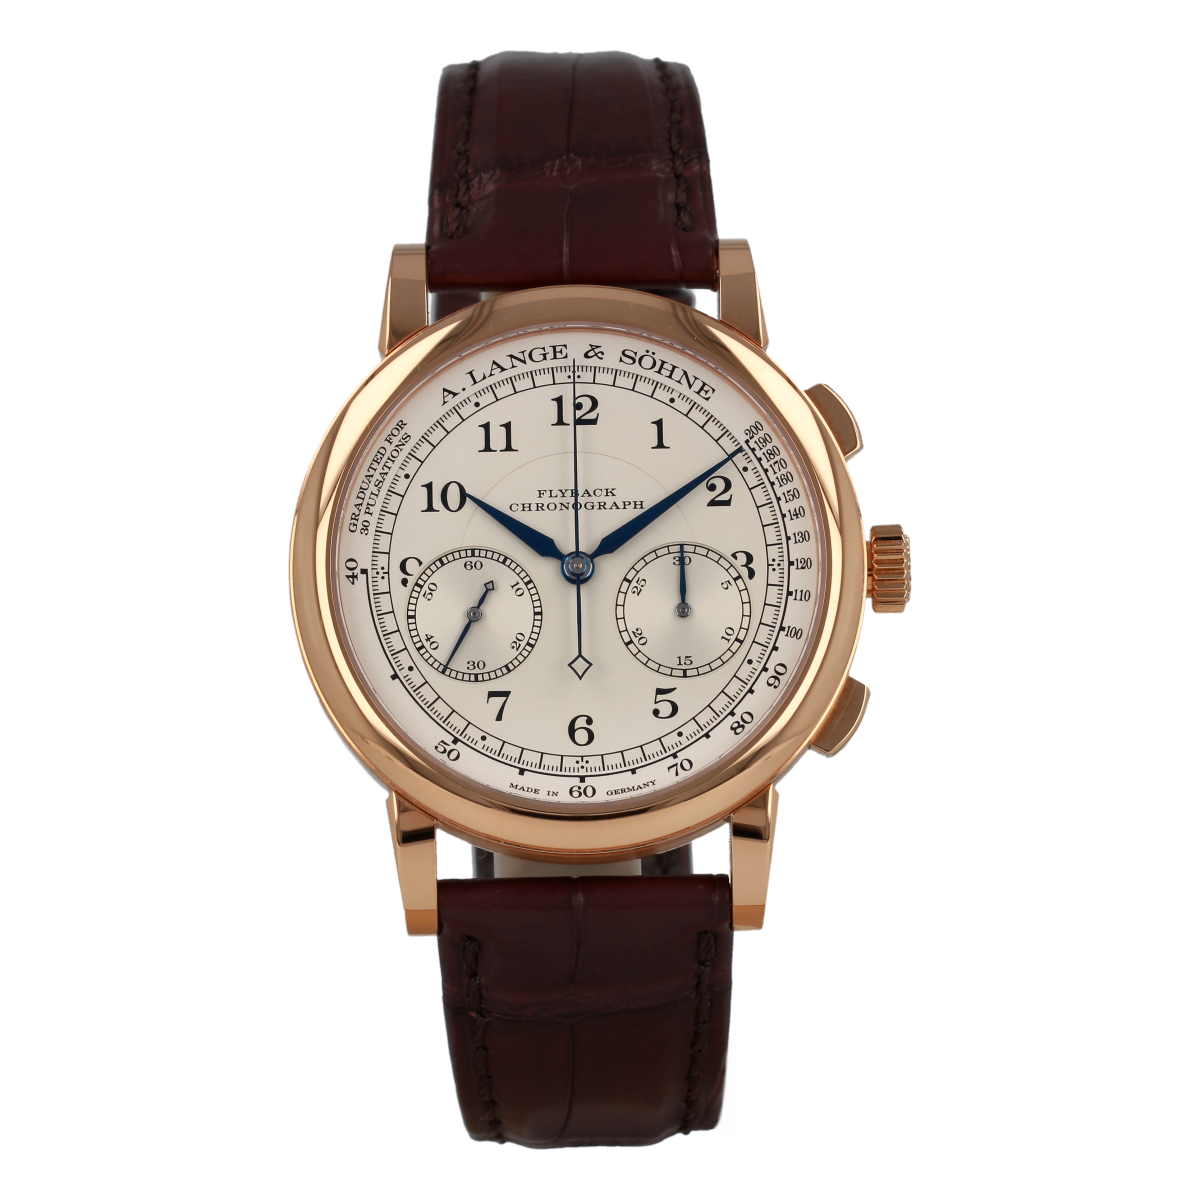 A.Lange  Söhne 1815 Chronograph Pink Gold *Like New* | Buy pre-owned A. Lange  Söhne watches